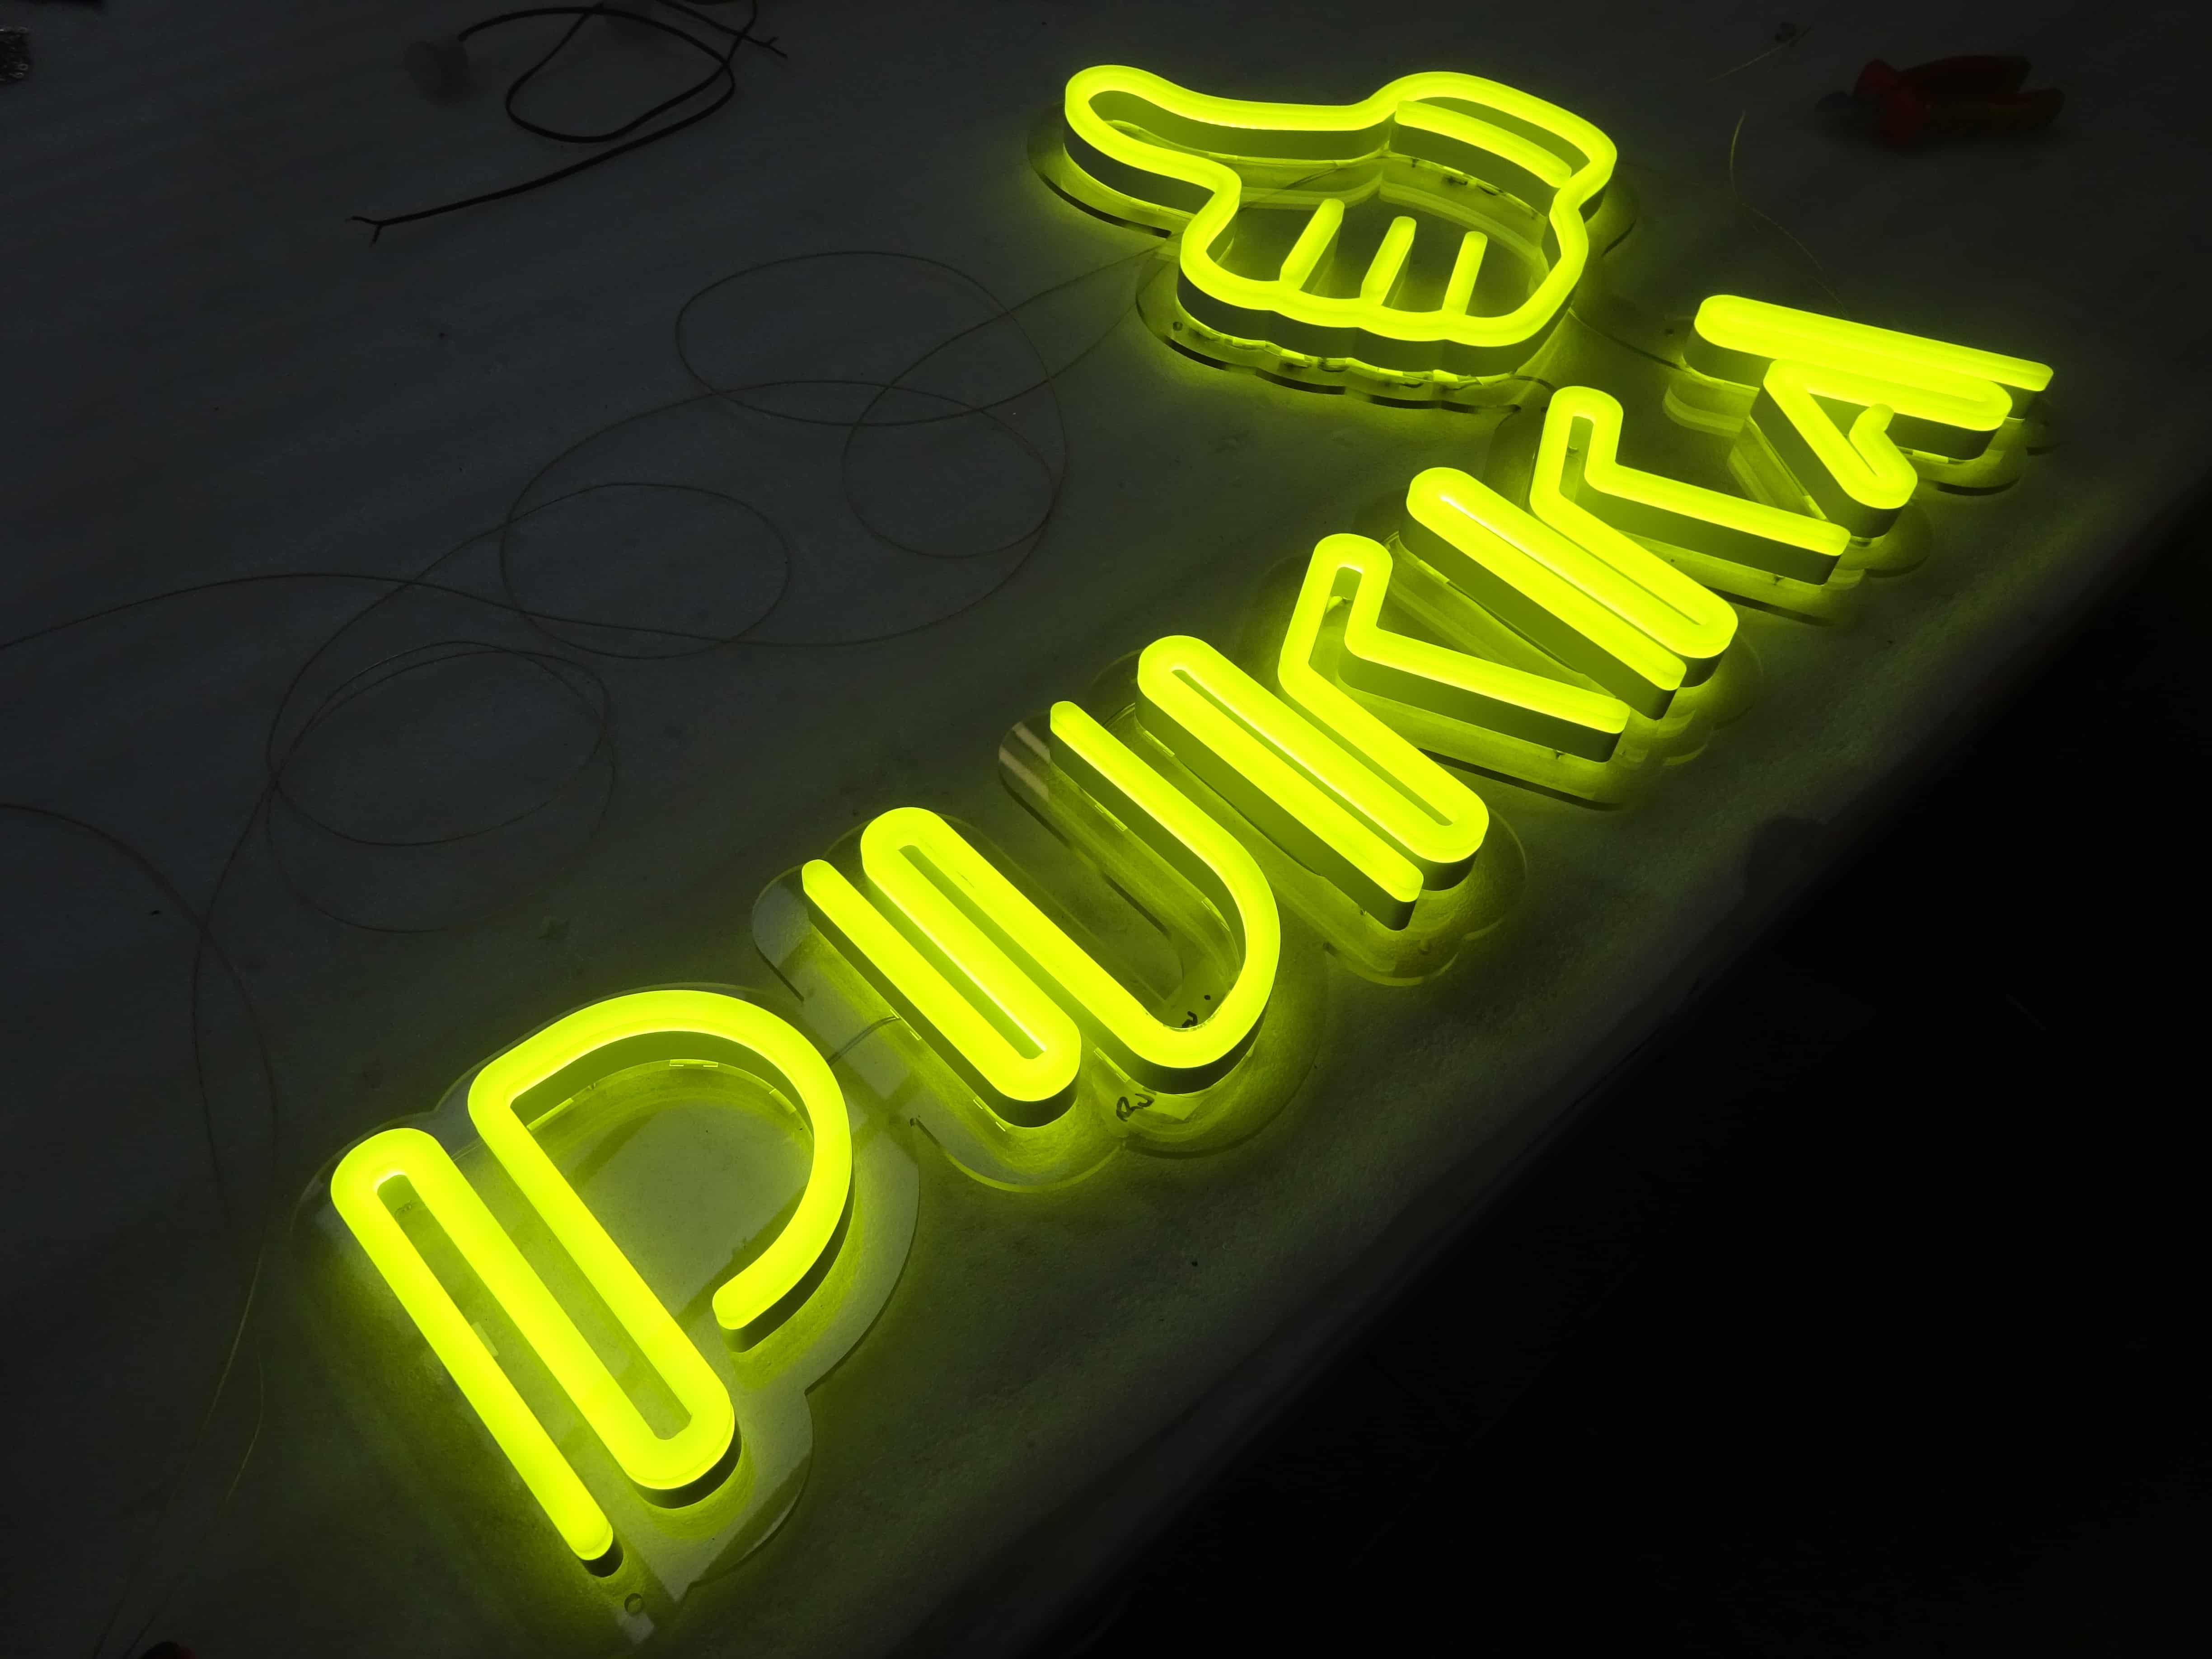 Thumbs up and illuminated writing faux neon sign reading 'Pukka' custom made by NeonPlus